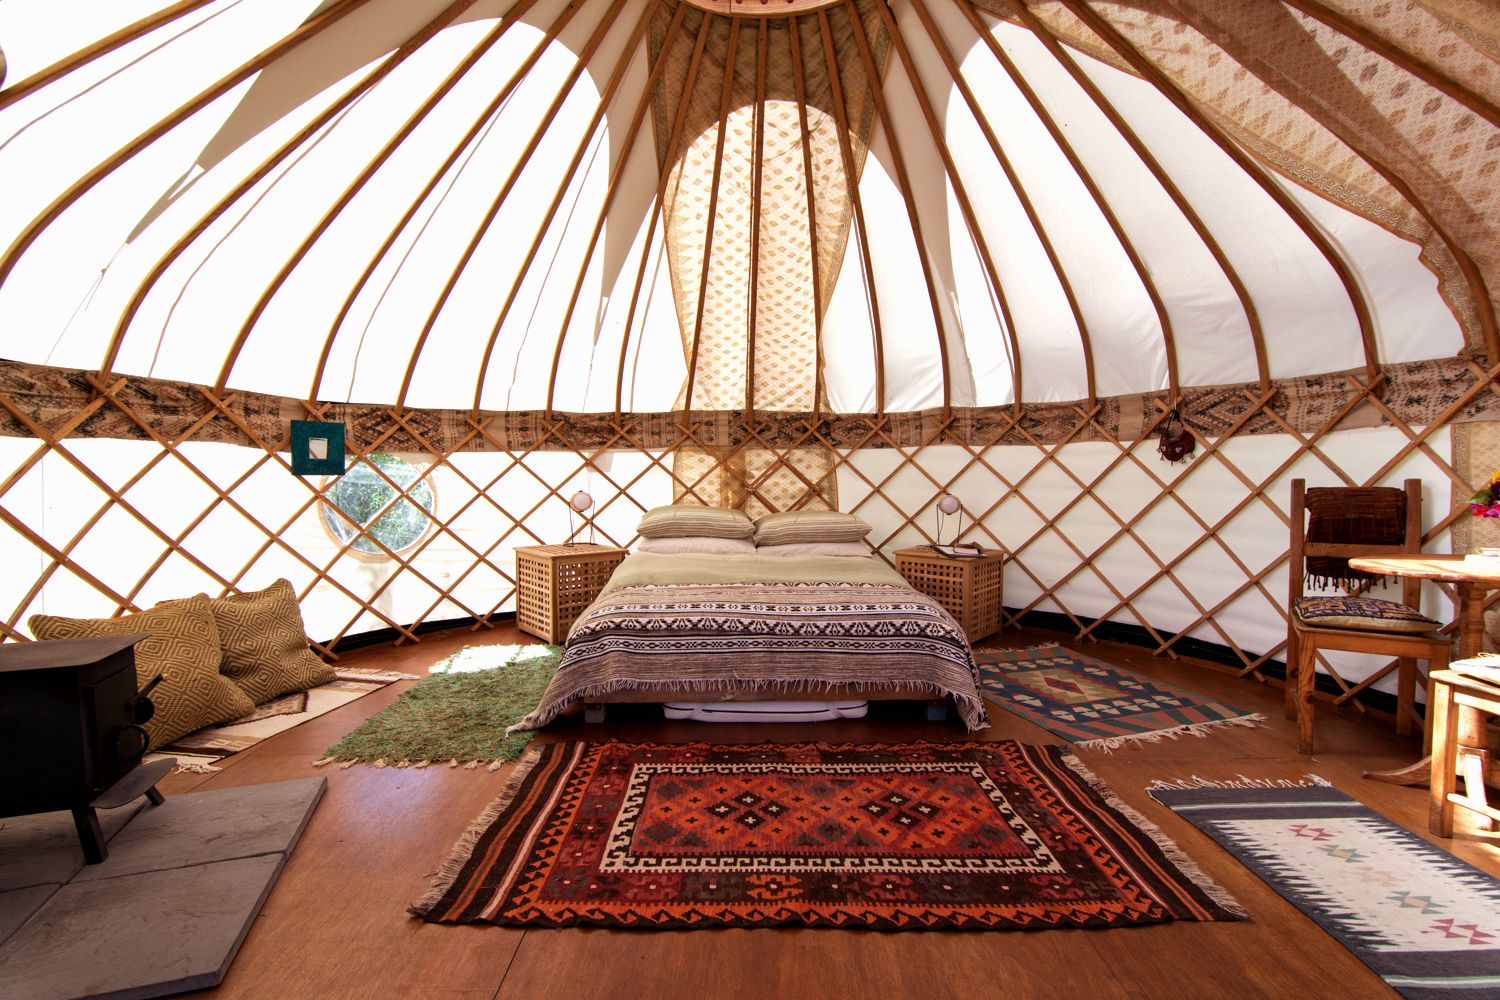 Glamping near me - find glamping near your location